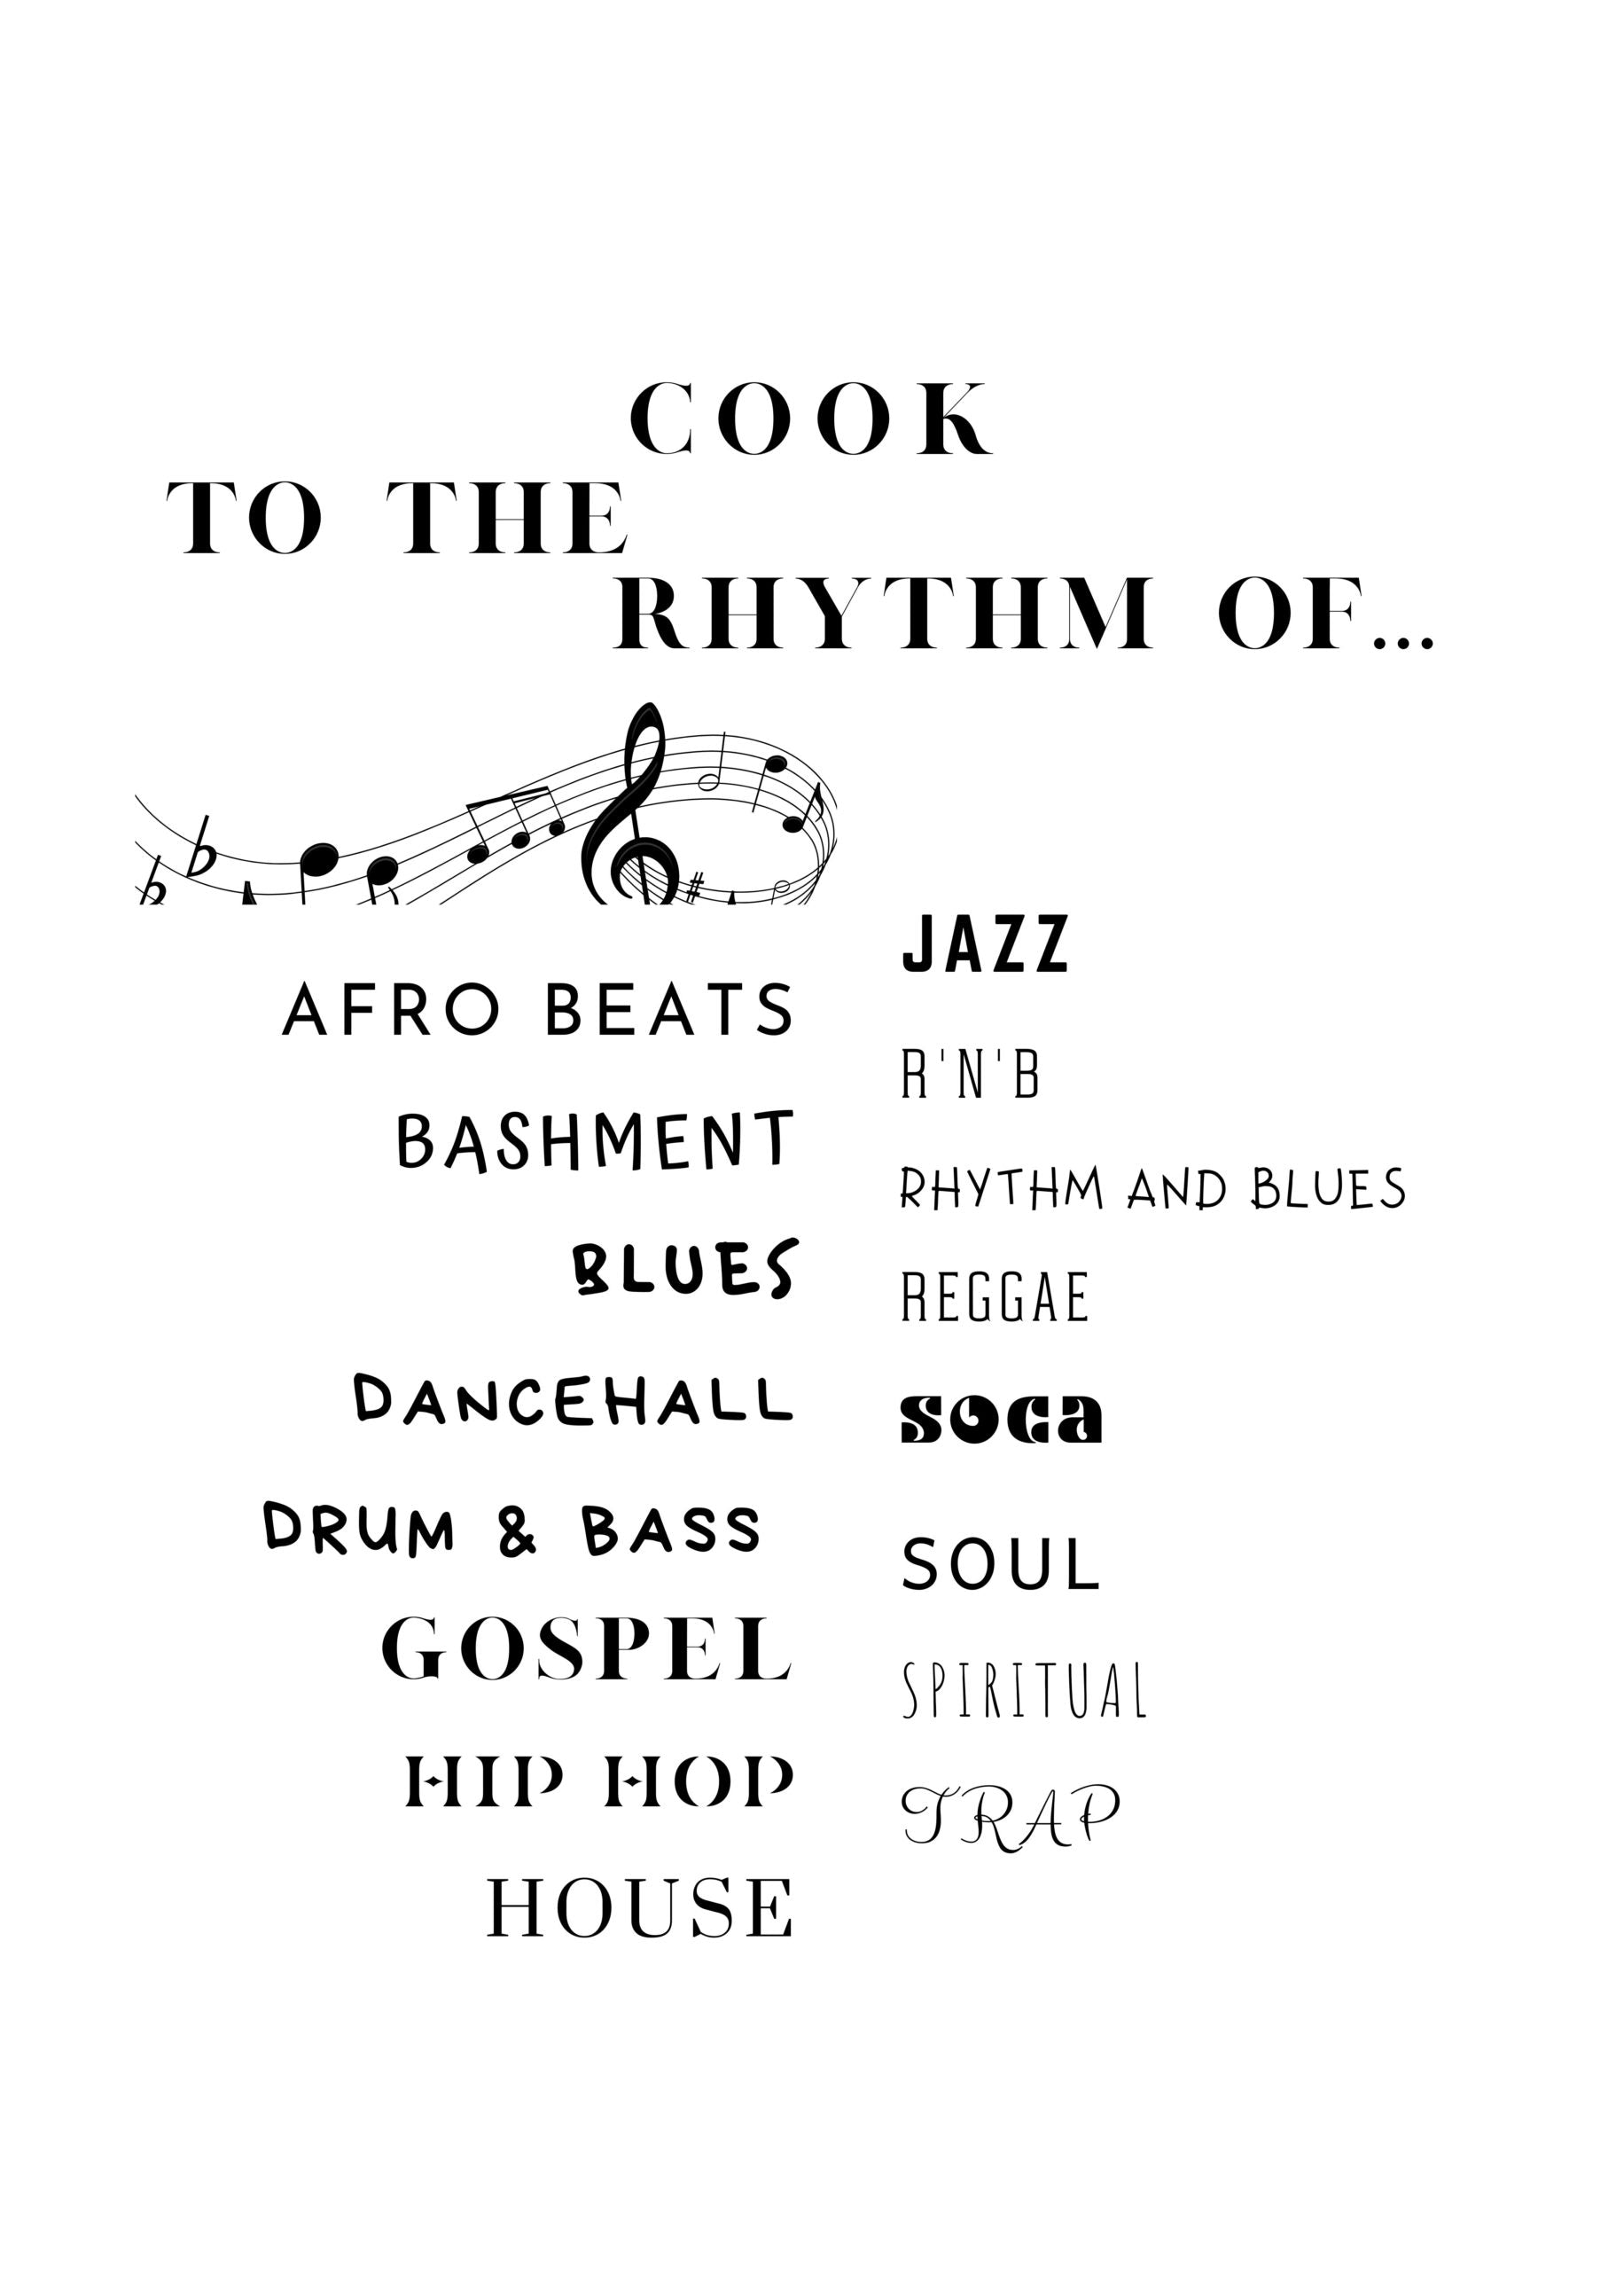 COOK TO THE RHYTHM